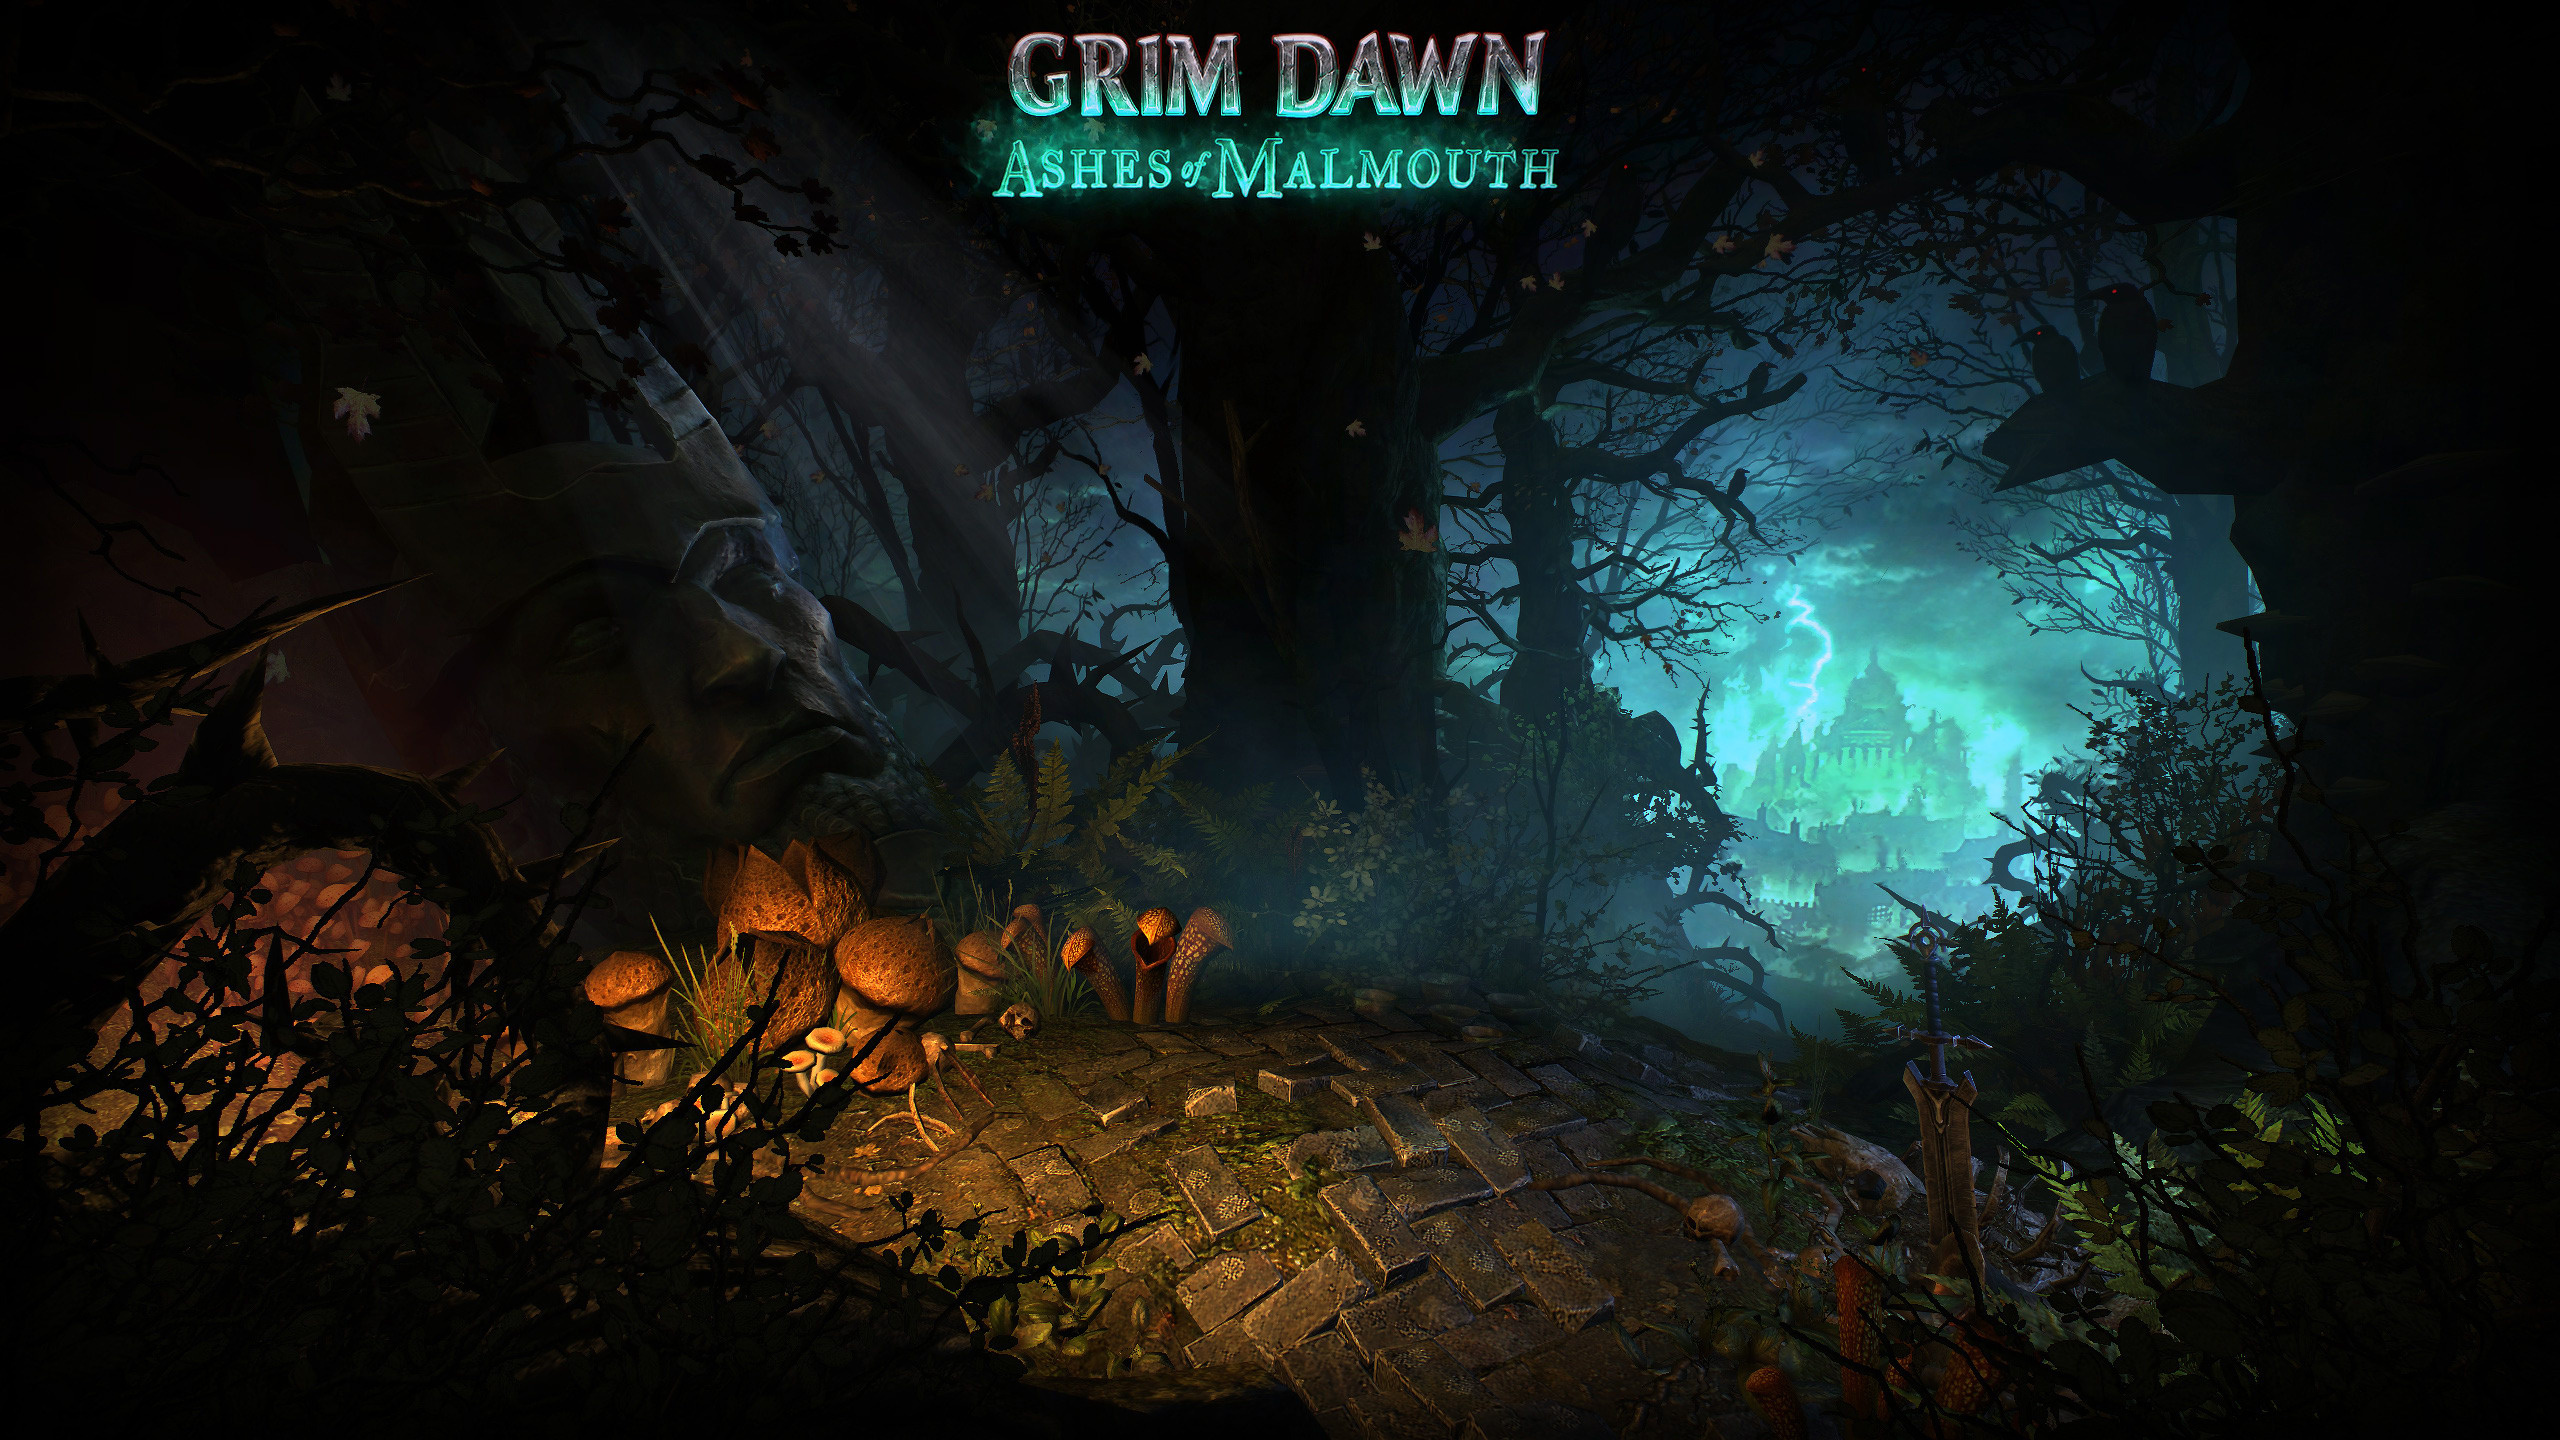 Grim Dawn: Ashes of Malmouth styled main menu, The downloadable DLC released in 2017. 2560x1440 HD Wallpaper.